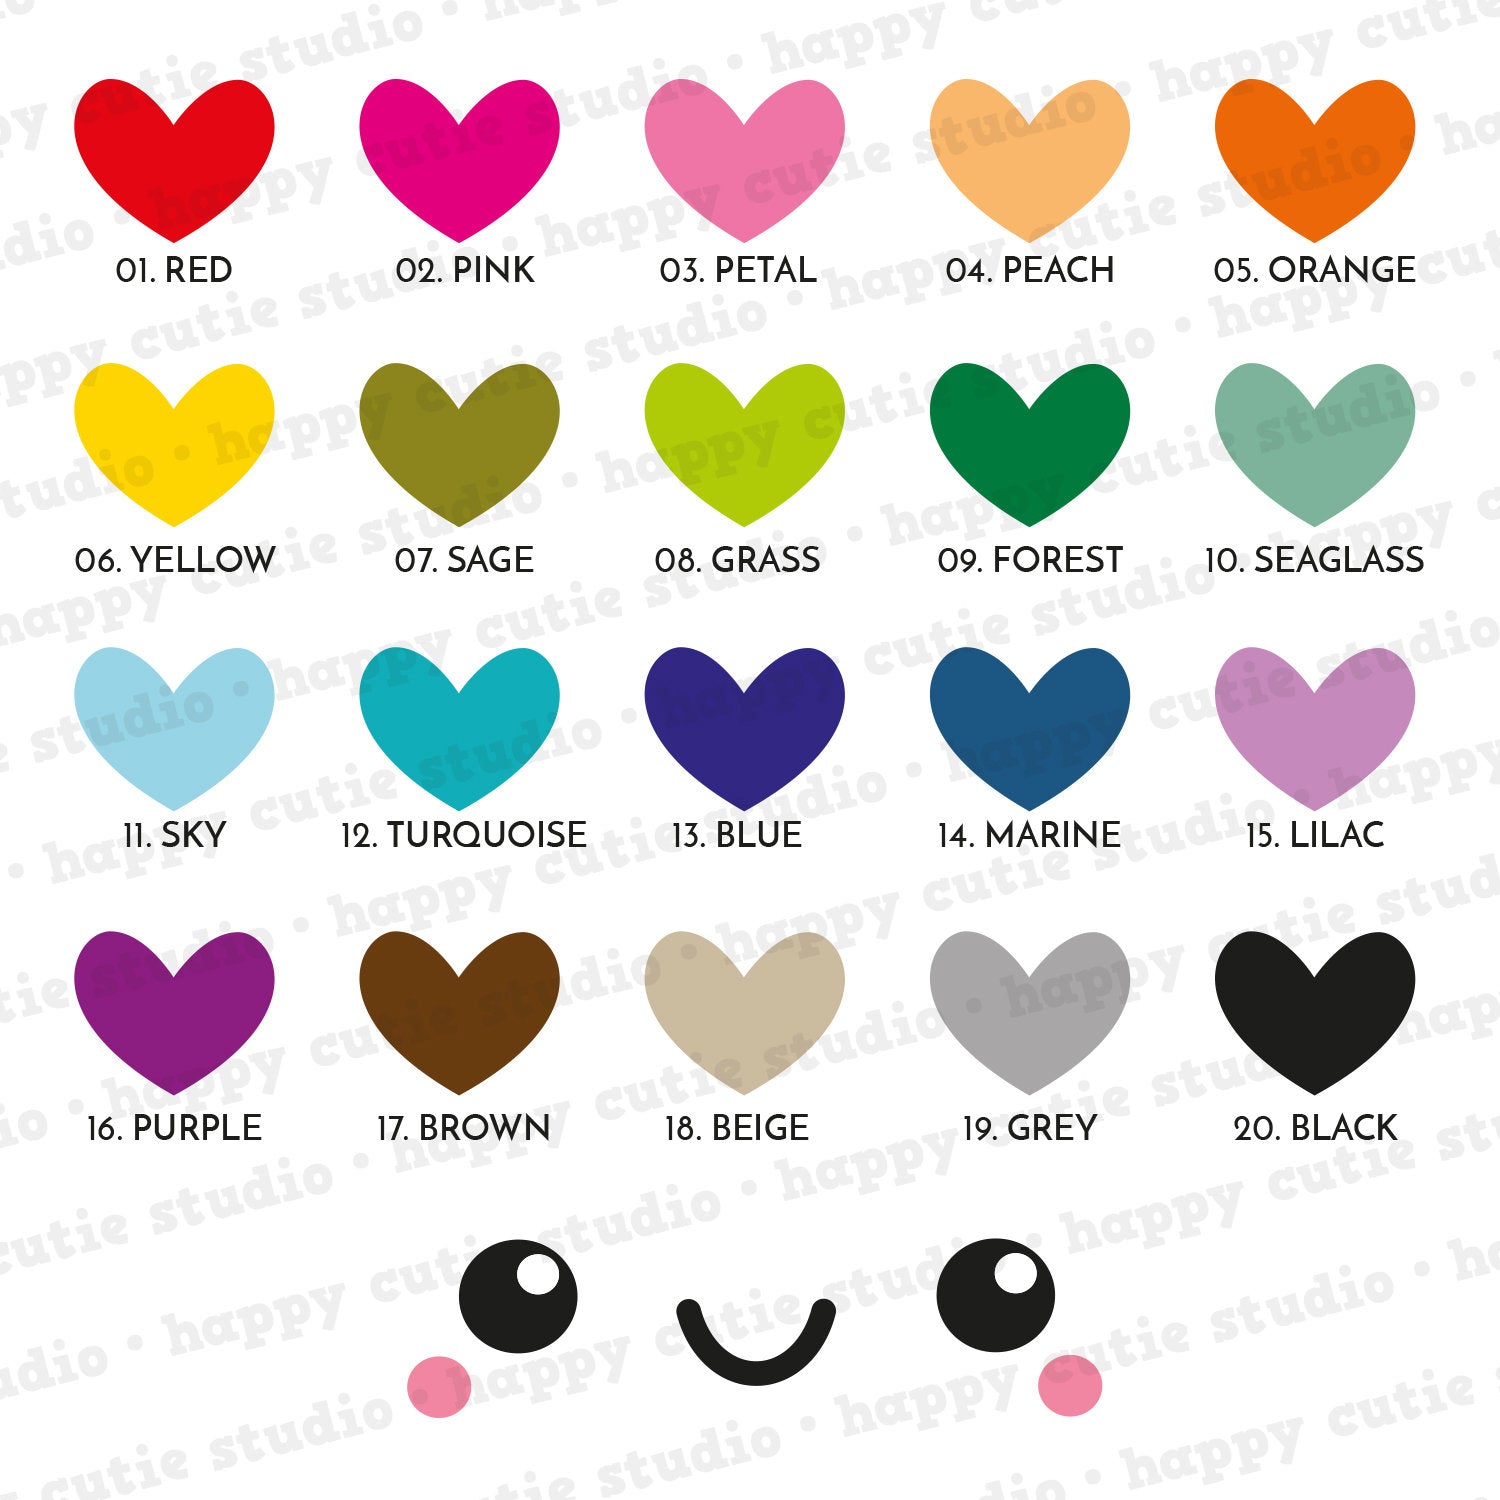 168 Cute Colourful Tiny Circles/Functional/Practical Planner Stickers